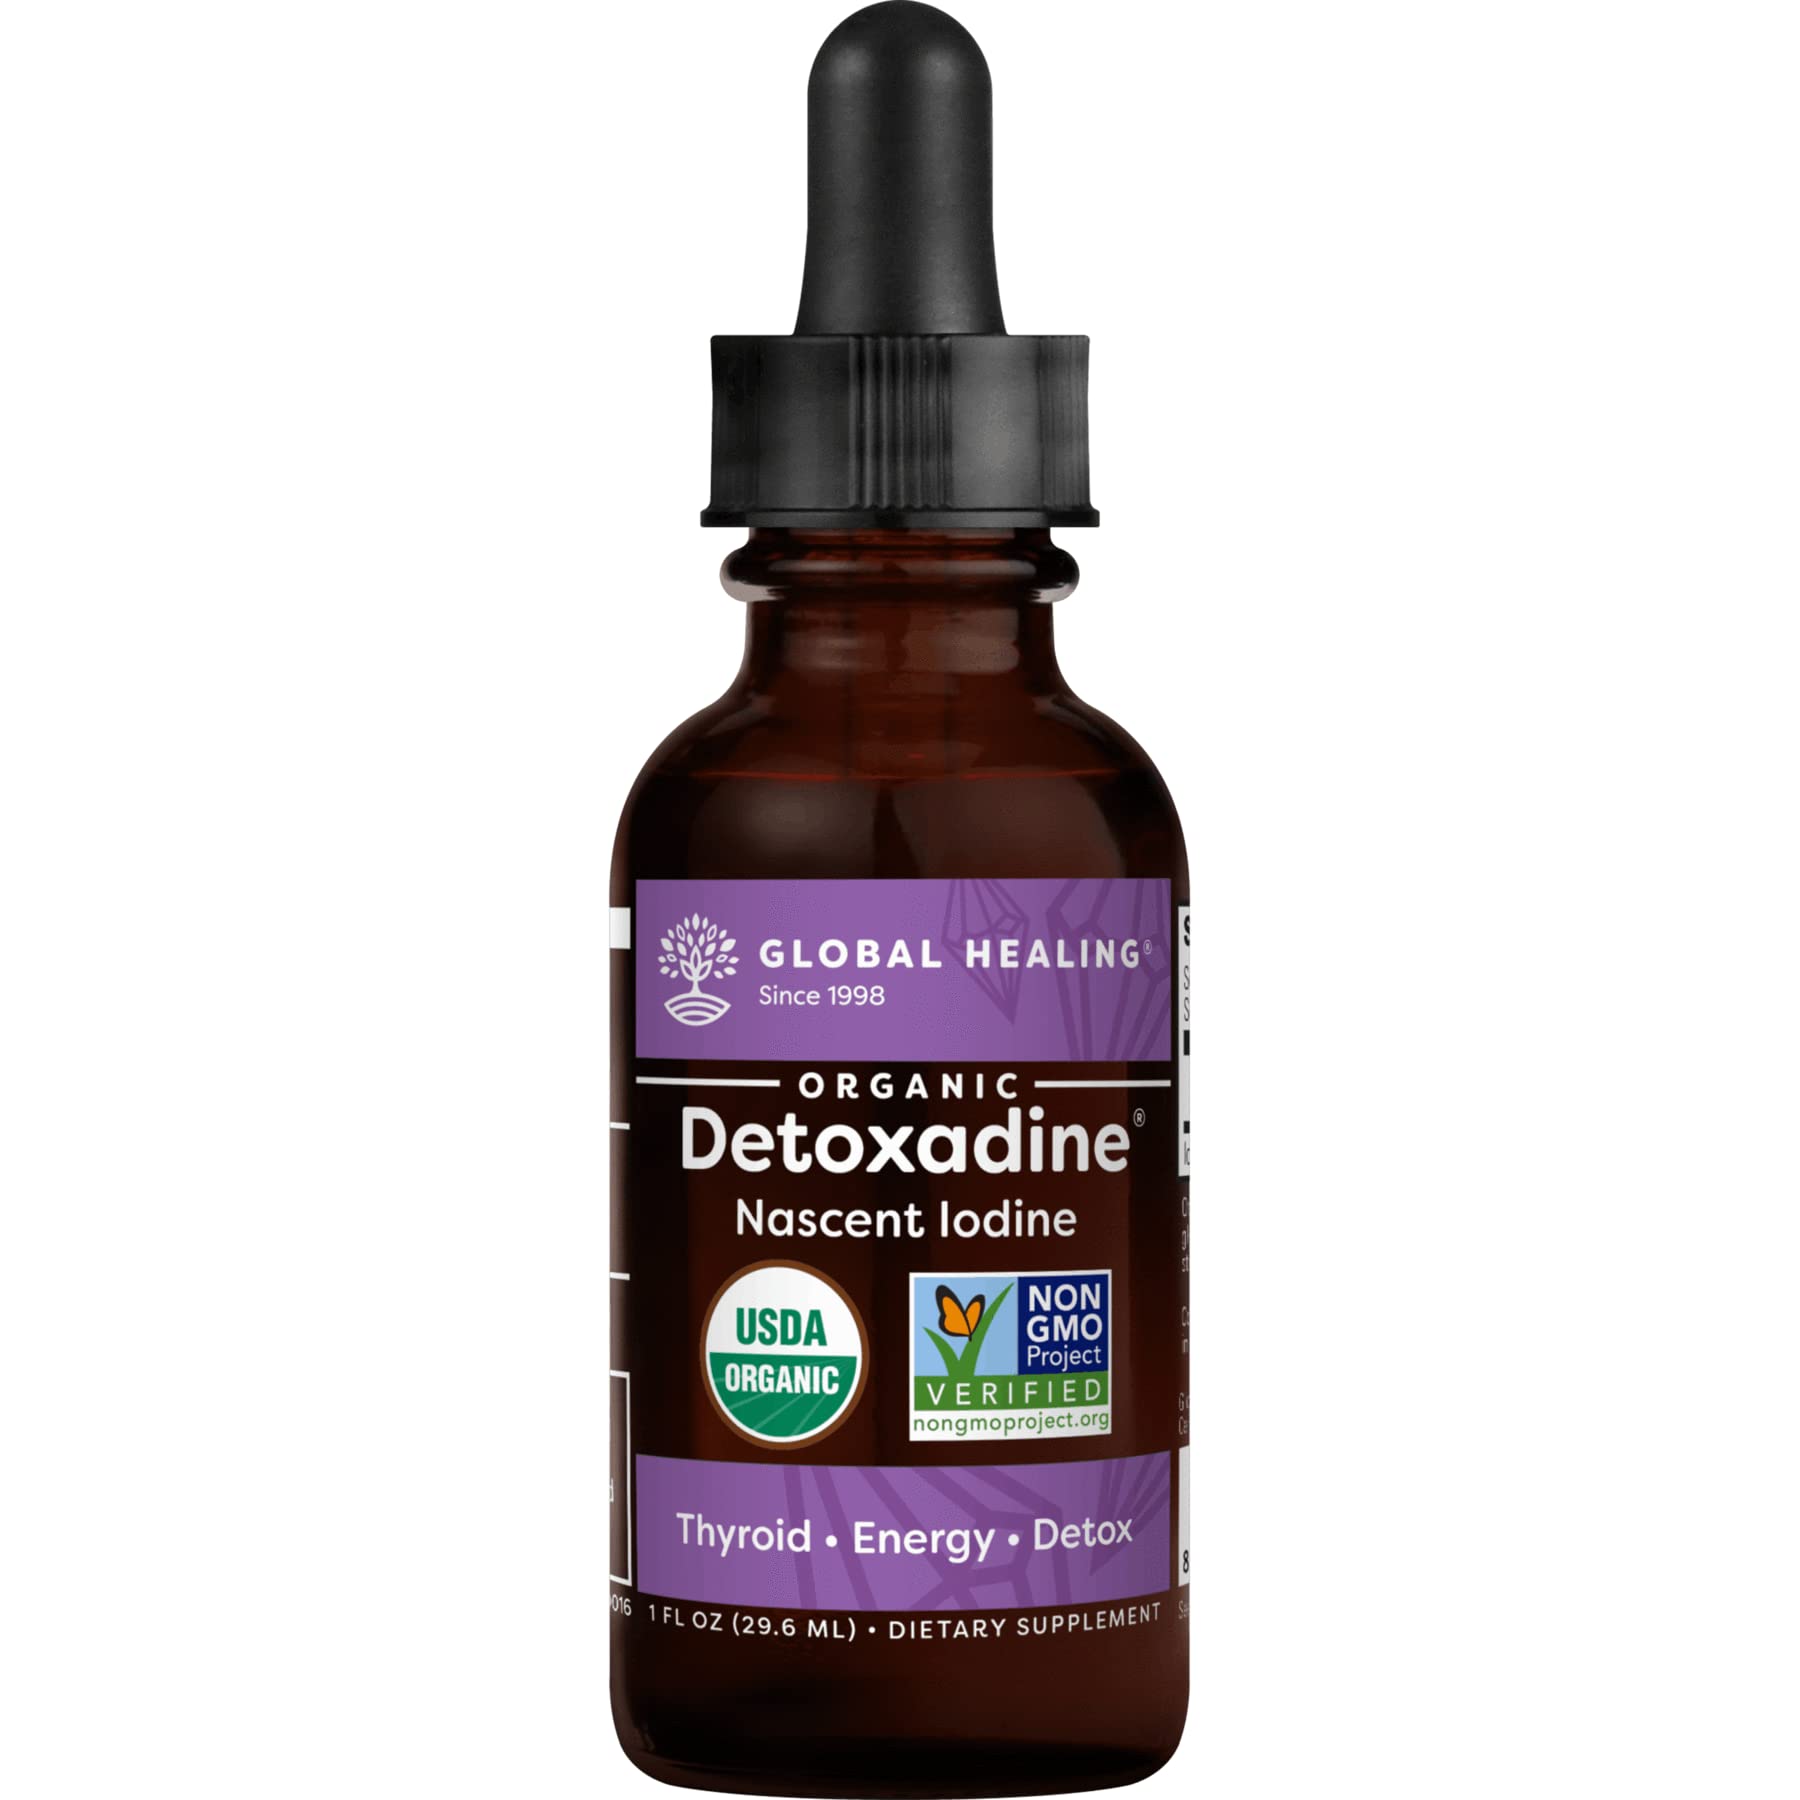 Book Cover Global Healing Detoxadine - Organic Nascent Iodine Liquid Supplement Drops for Thyroid Support, Detox Cleanse, Metabolism Health and Better Sleep - Non-GMO, Vegan, 200 Servings (6-Month Supply) - 30mL